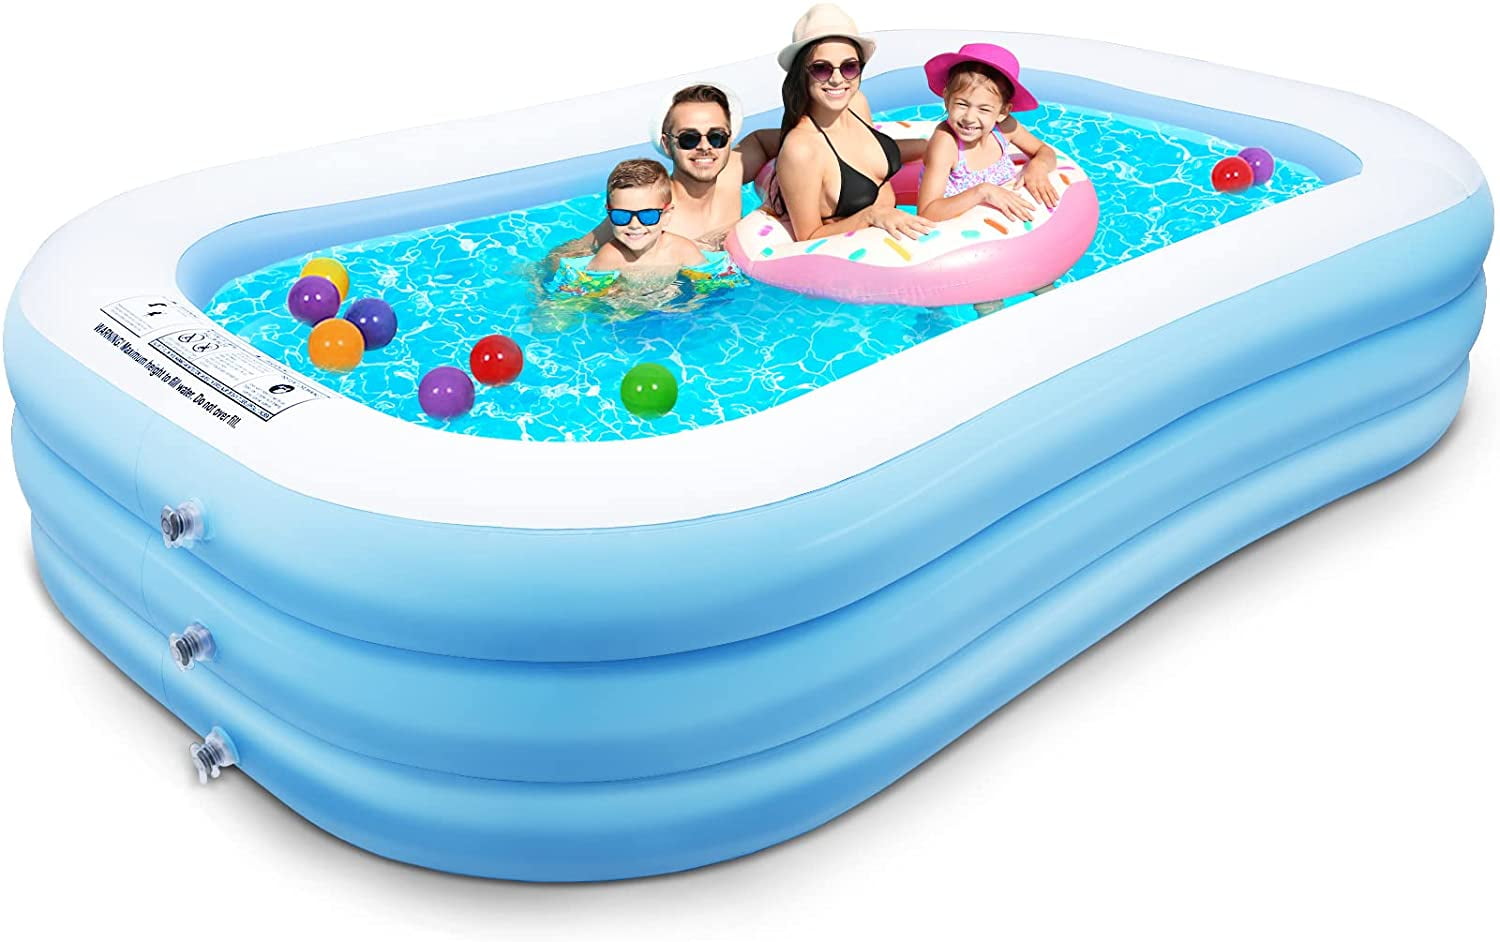 Blow Up Baby Pool Inflatable Outdoor Backyard Water Toy Padded Infant Kids New 